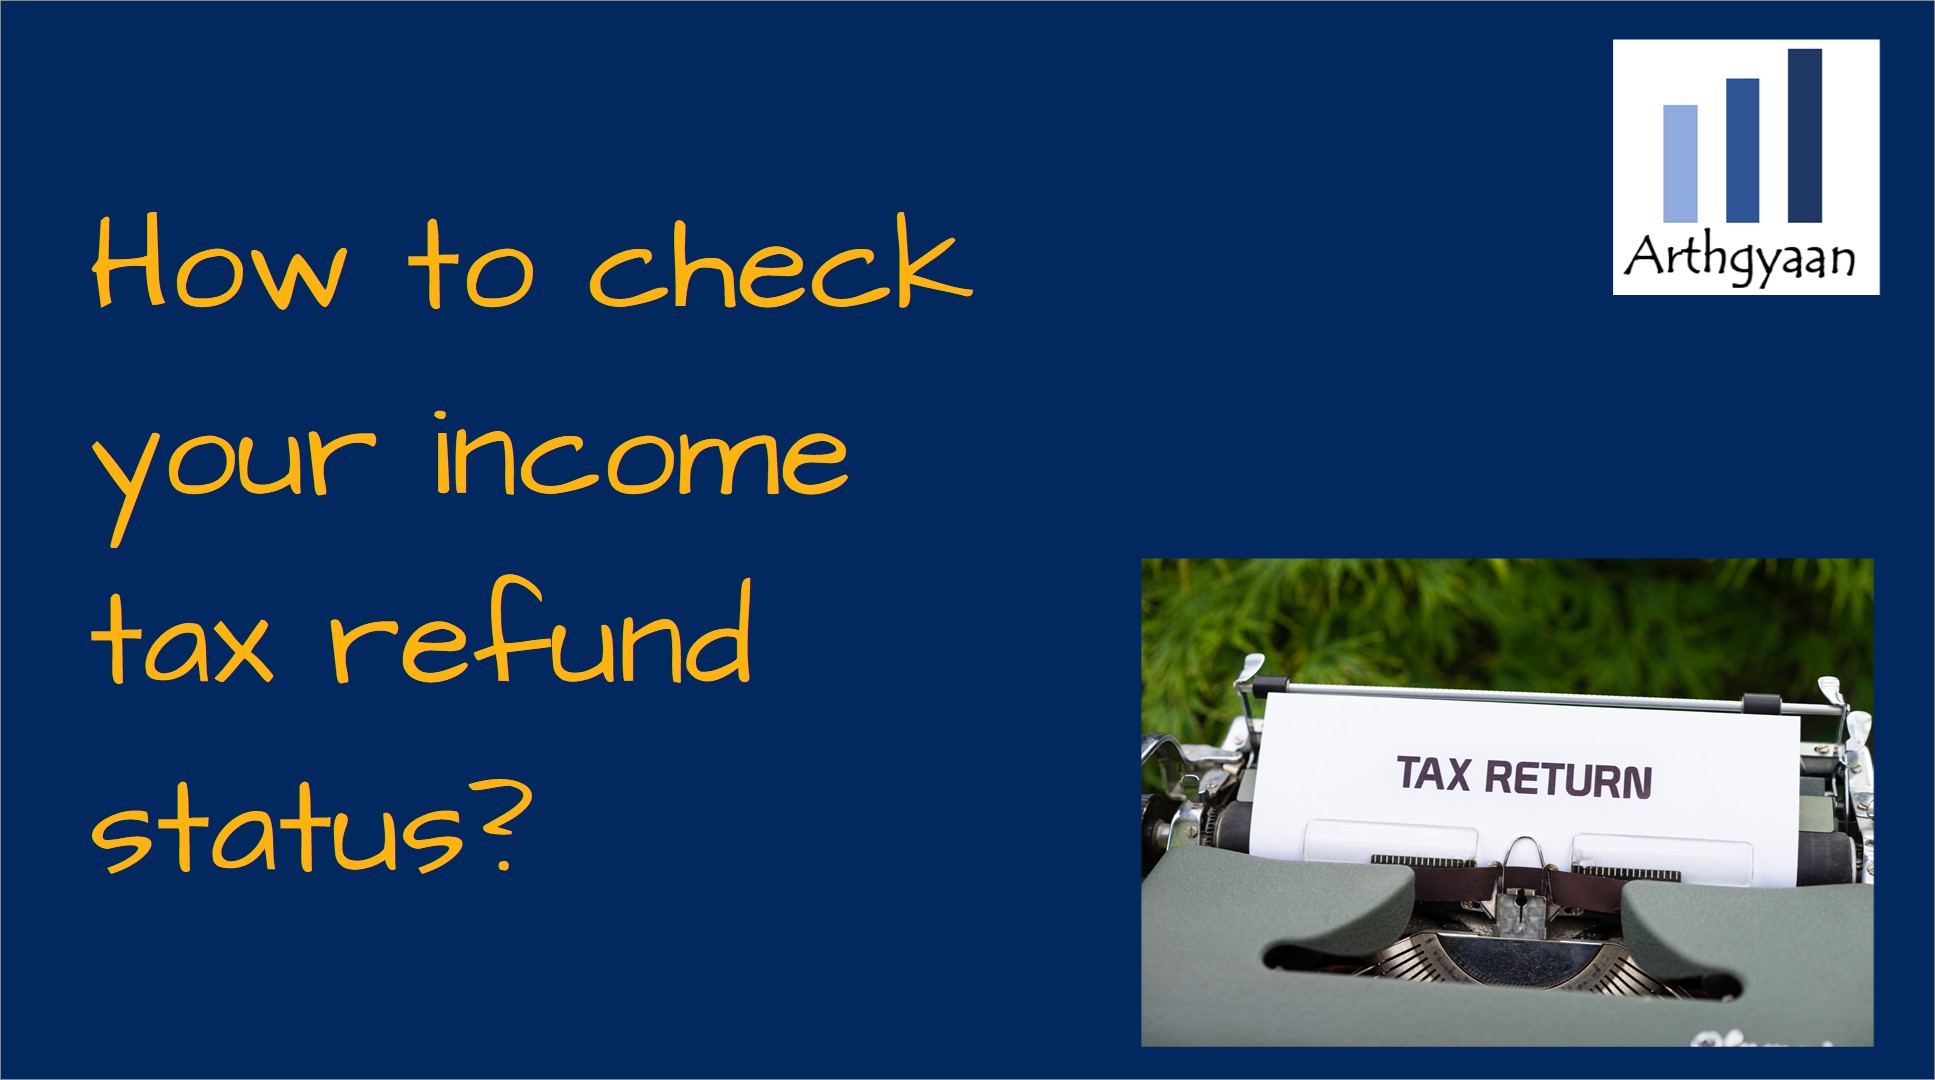 <p>This article shows you how to know the status of your income tax refund from Income Tax India website.</p>

